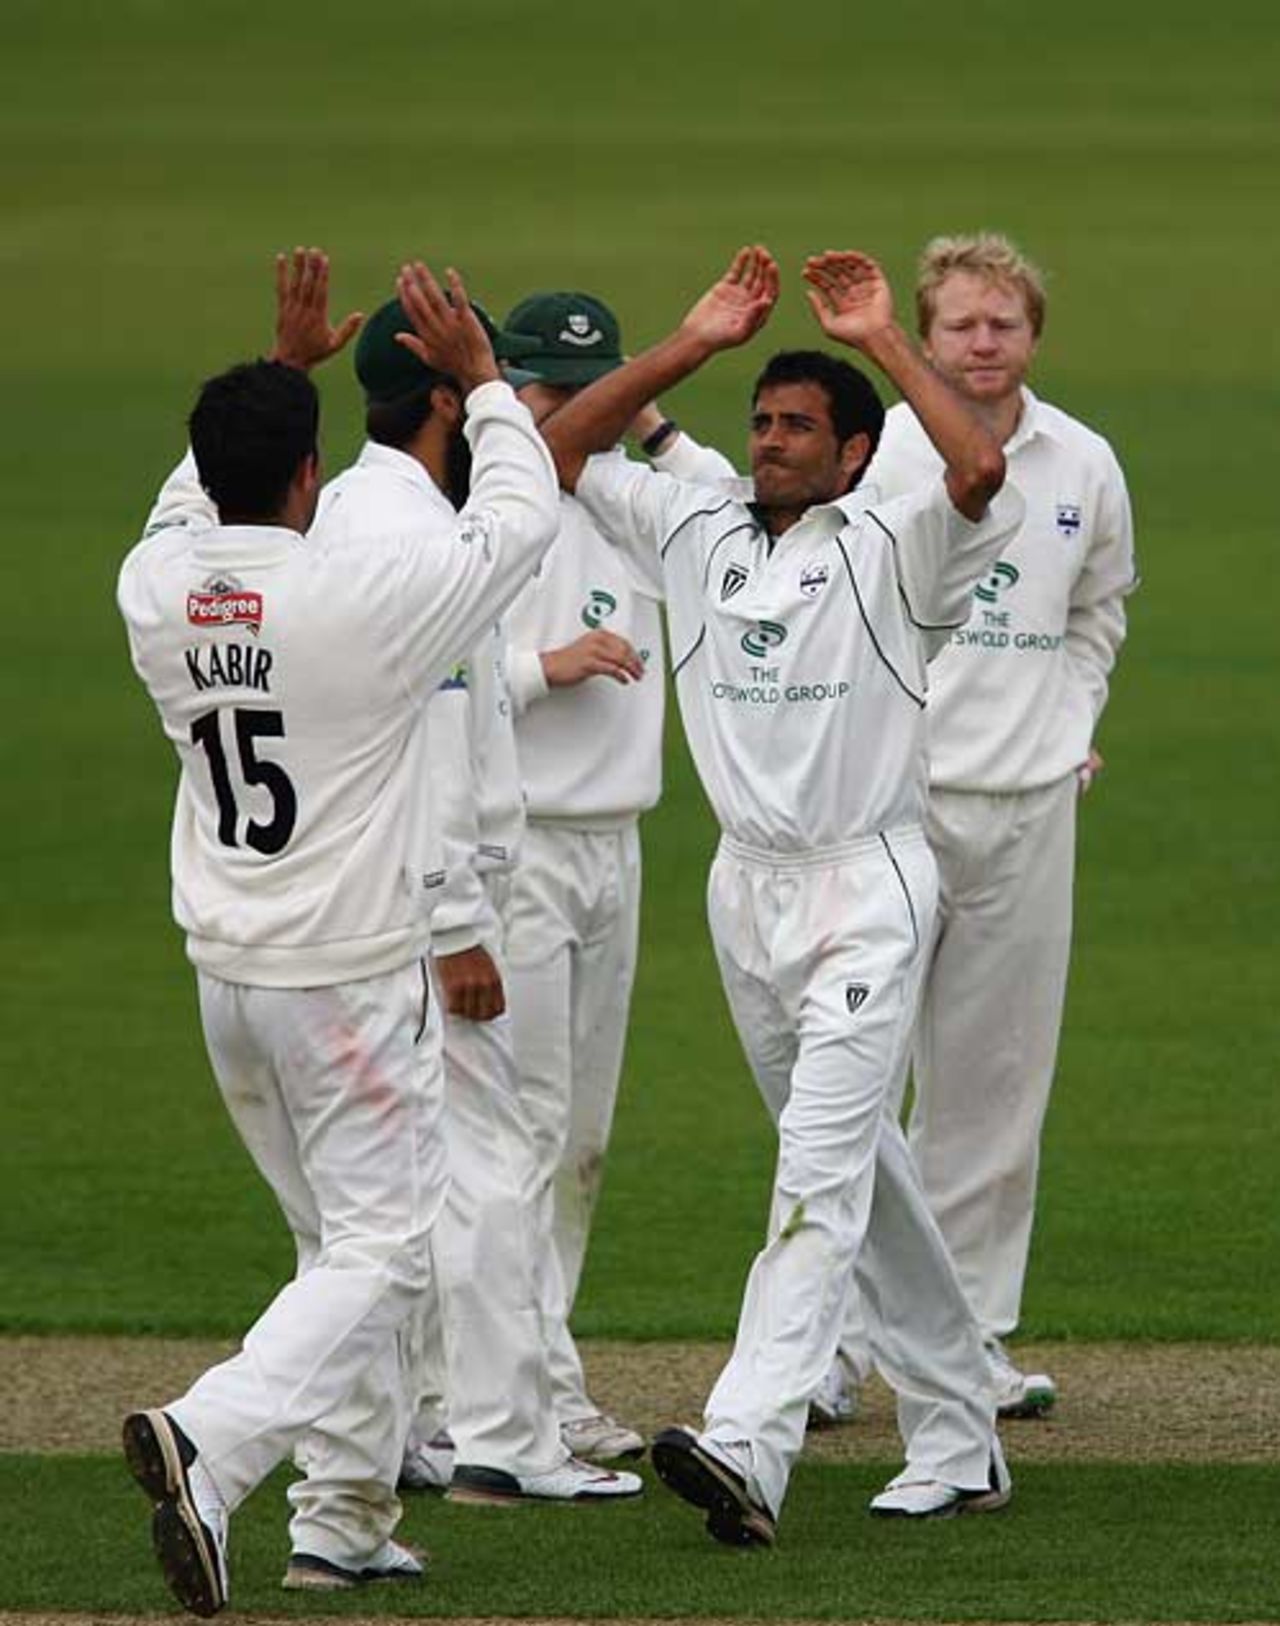 Imran Arif collected four wickets to help Worcestershire's cause, Hampshire v Worcestershire, County Championship Division One, The Rose Bowl, April 16, 2009